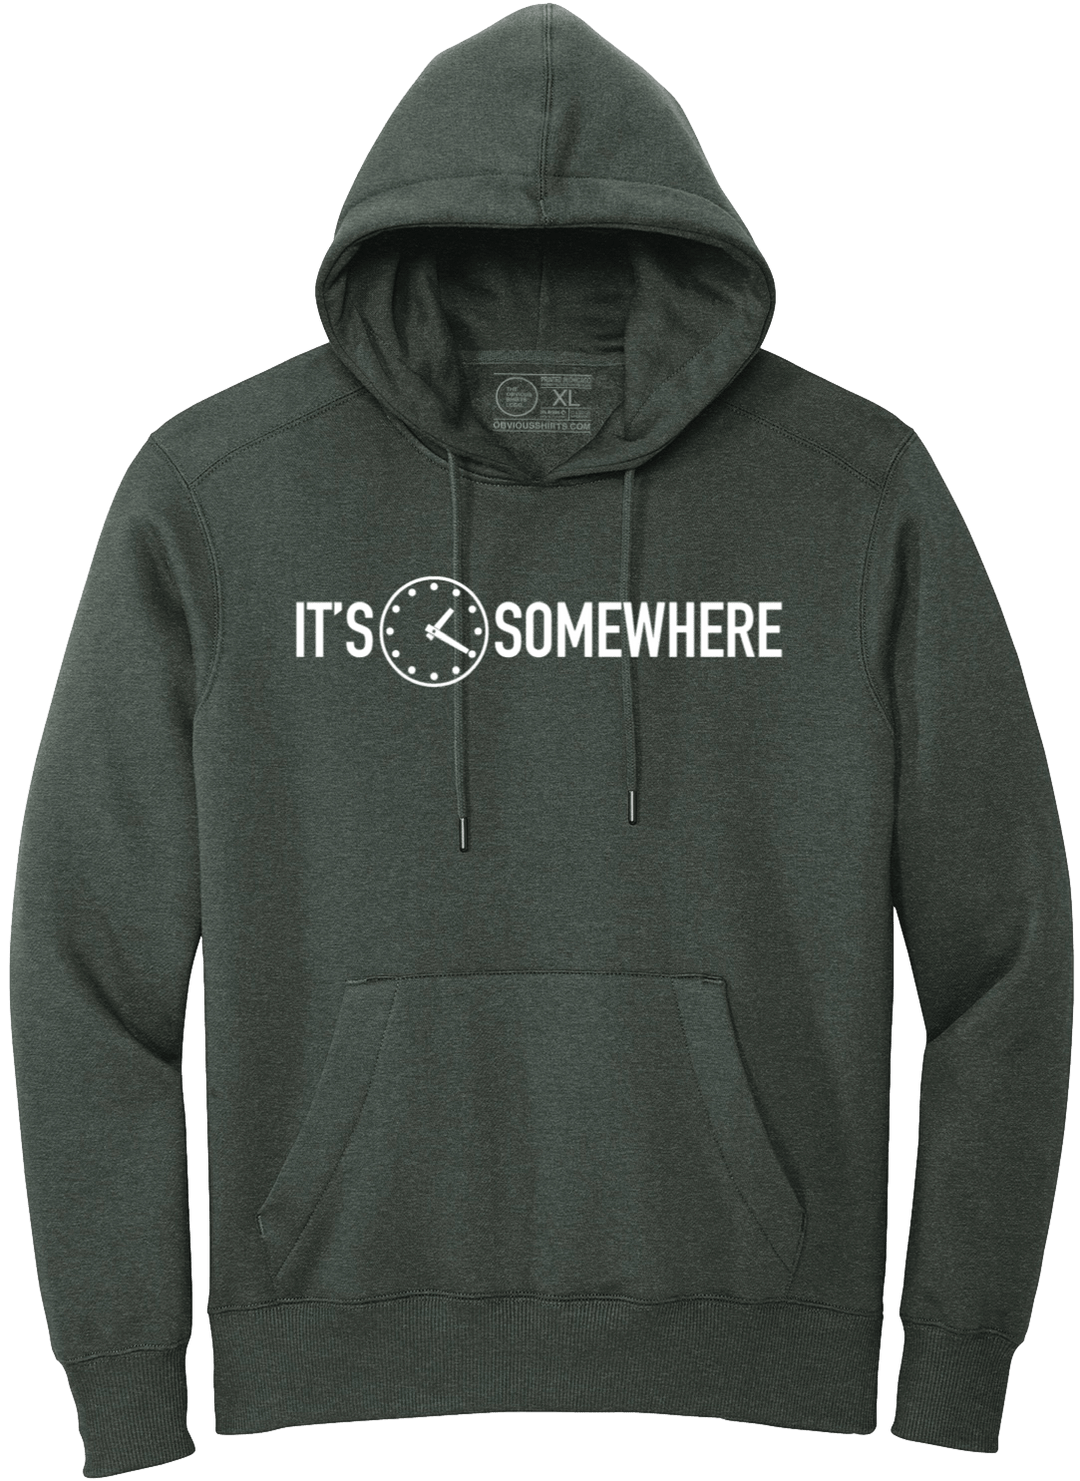 IT'S 1:20 SOMEWHERE. (HOODED SWEATSHIRT) - OBVIOUS SHIRTS